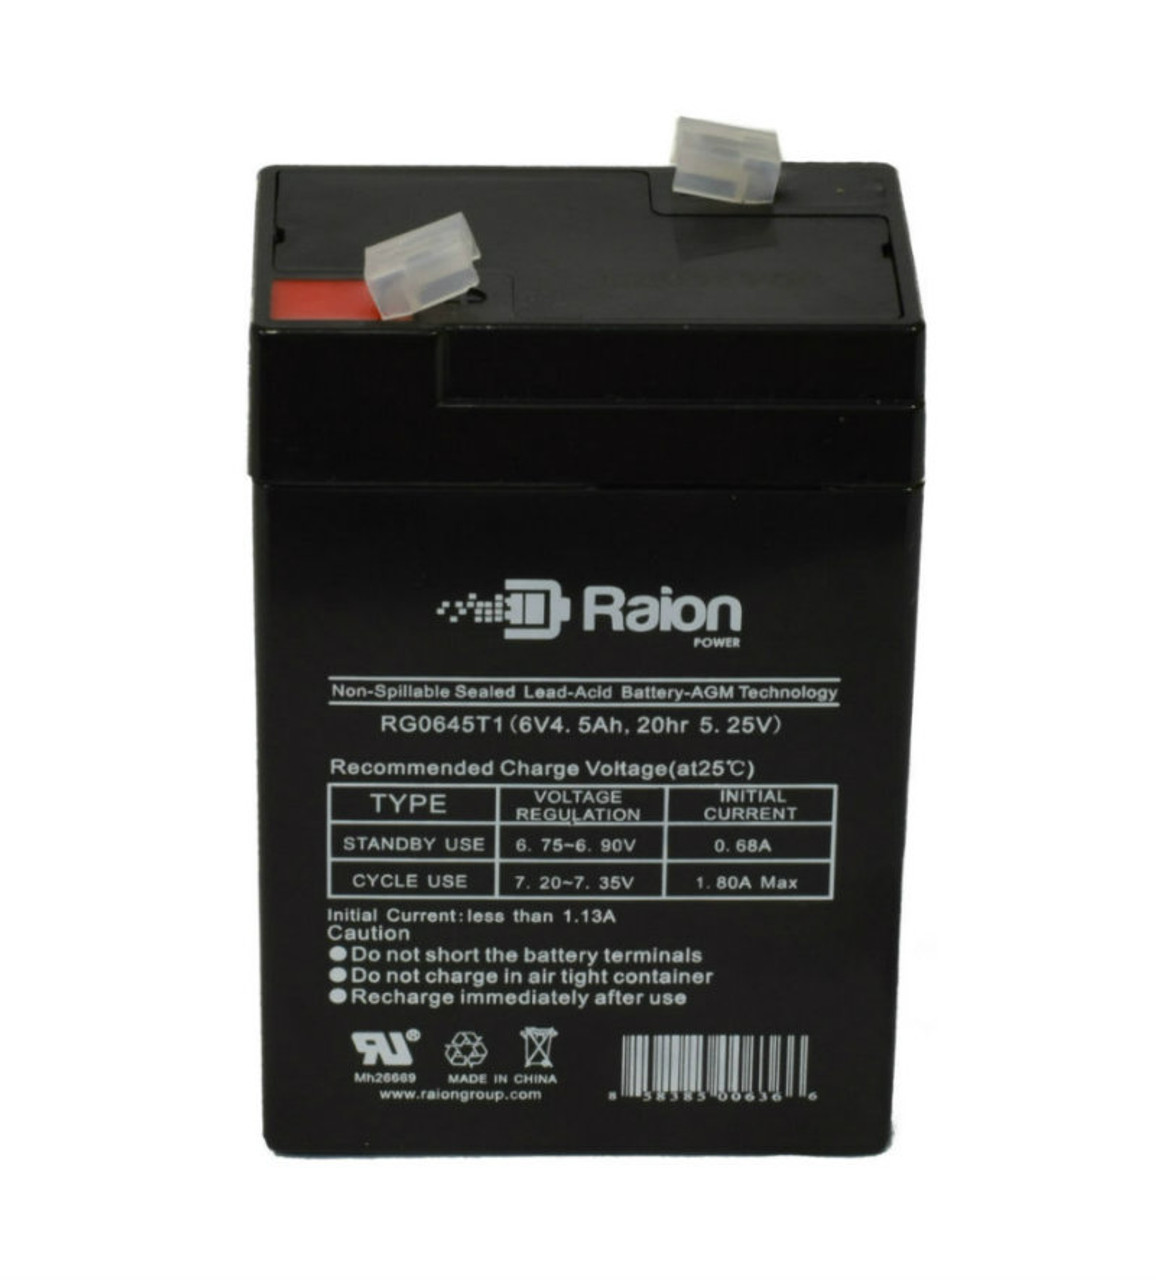 Raion Power RG0645T1 Replacement Battery Cartridge for Criticare Systems 502Us Pulse Oximeters